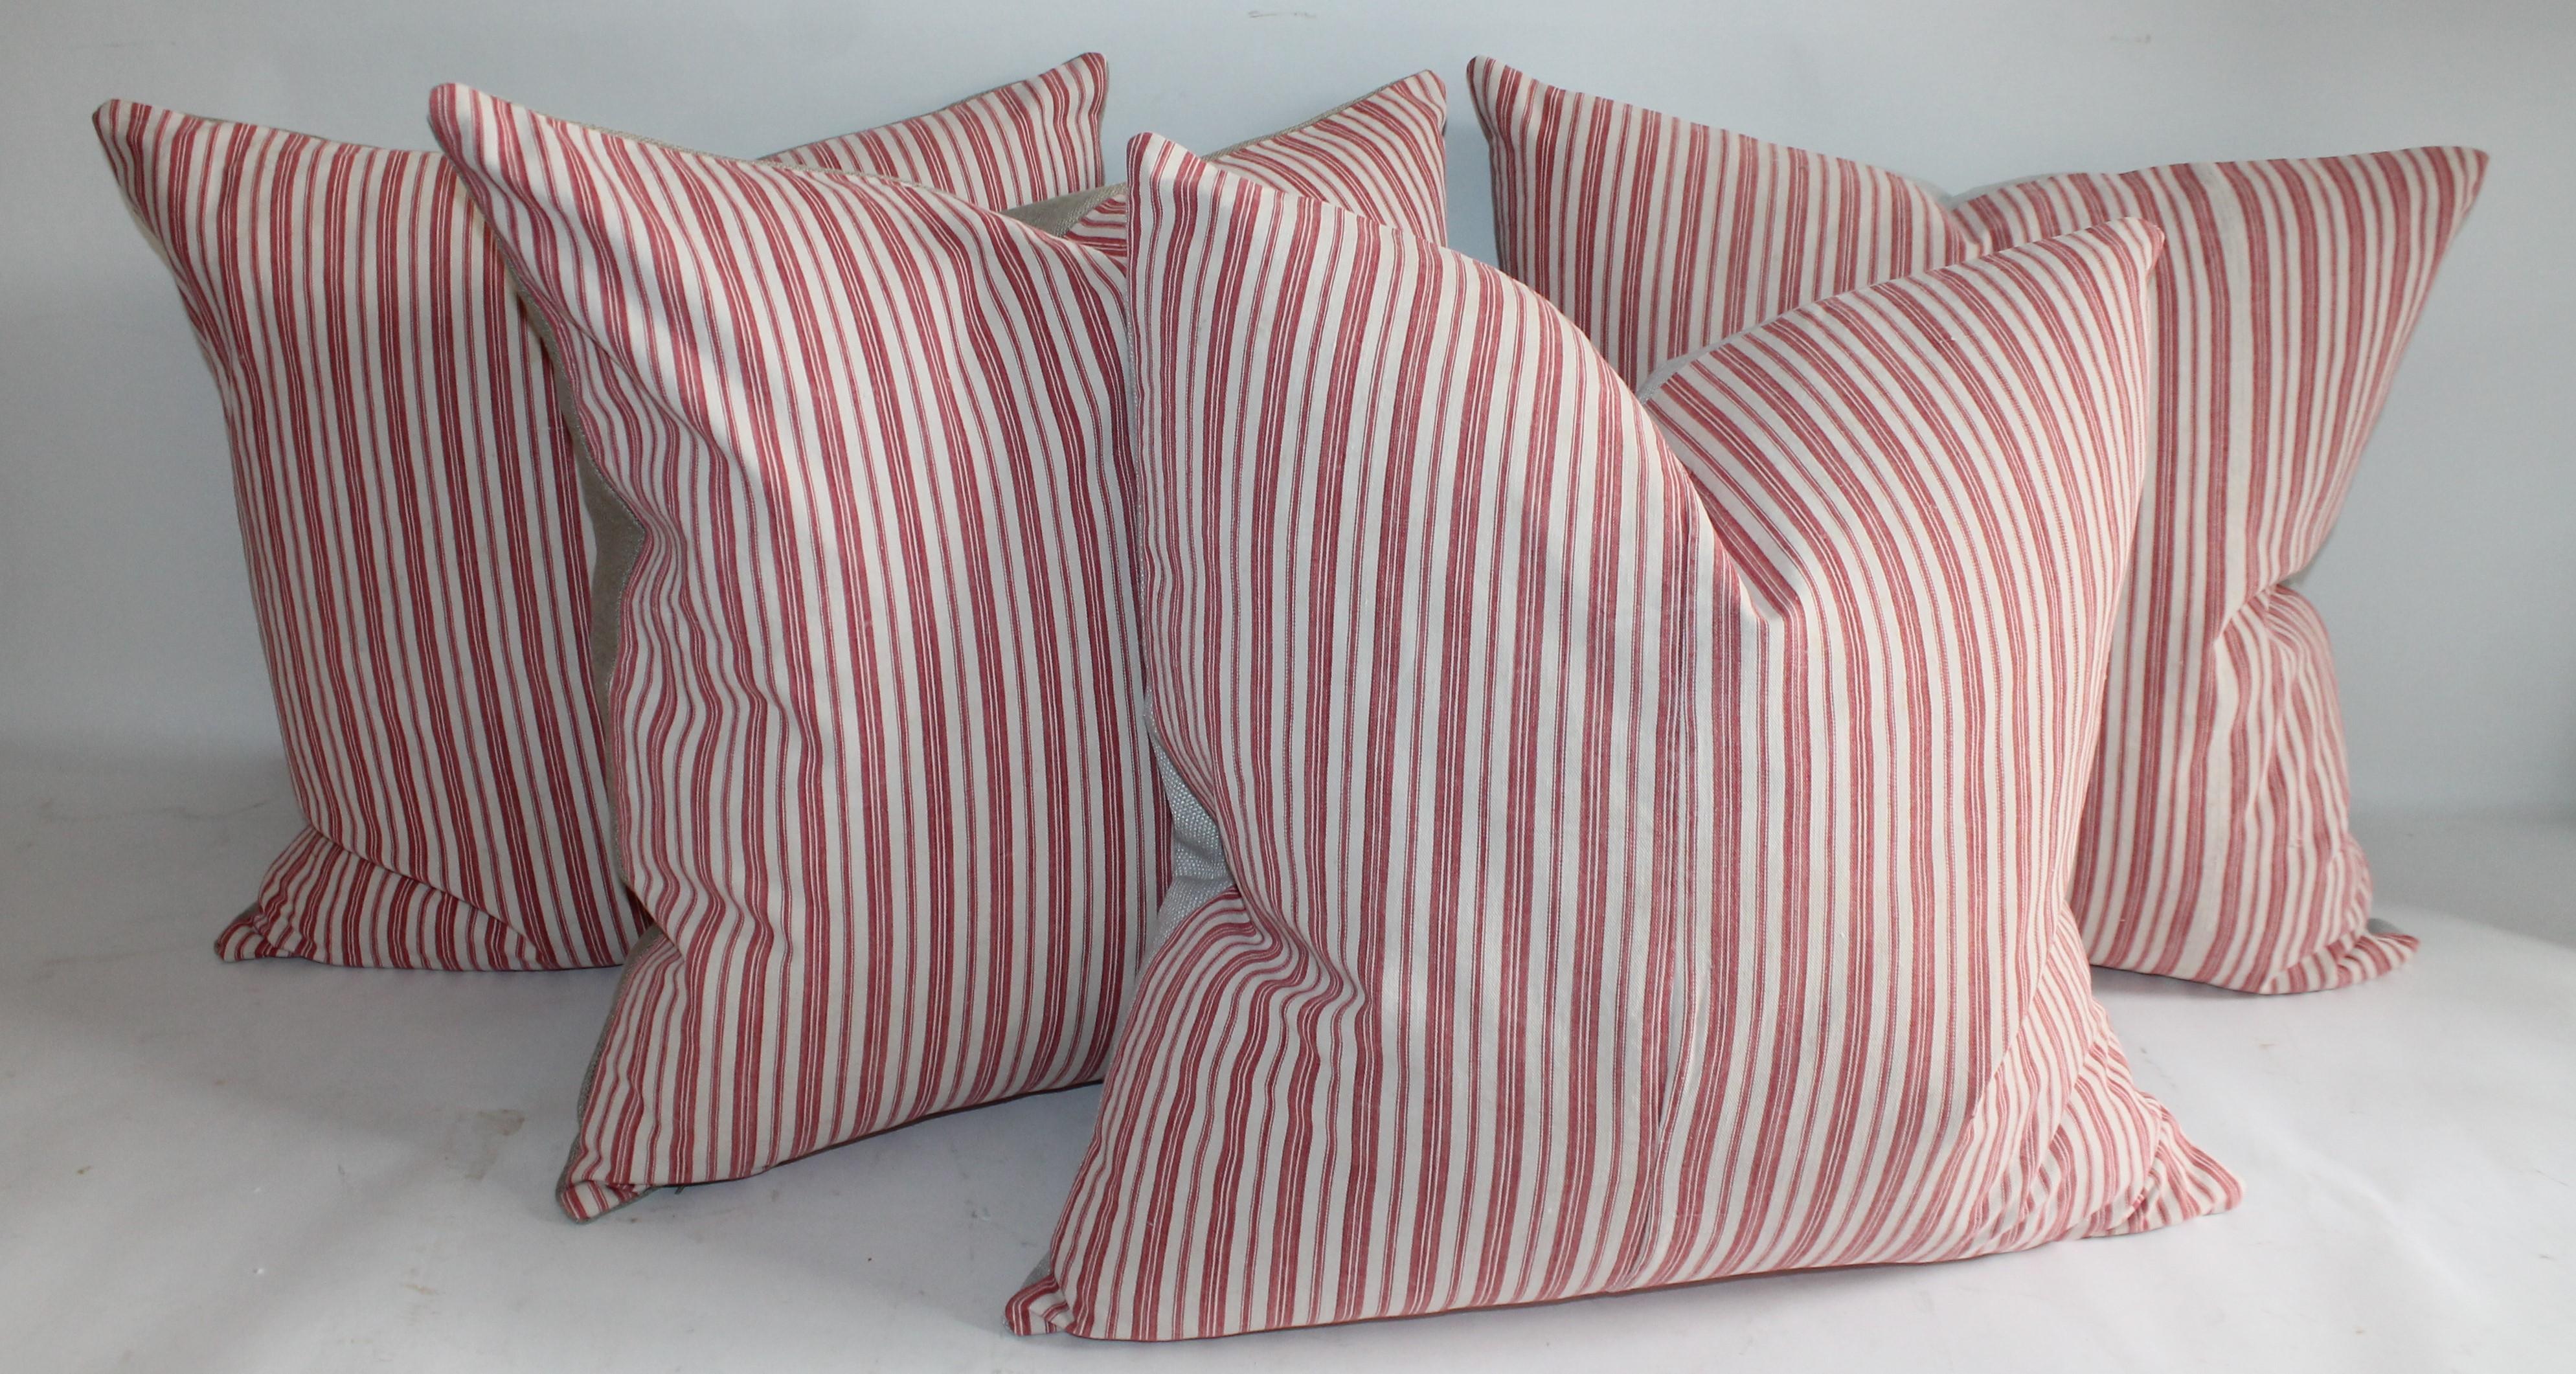 These 19th century candy stripe ticking pillows have a cream cotton linen backing. They are down and feather fill. Two pairs of pillows.